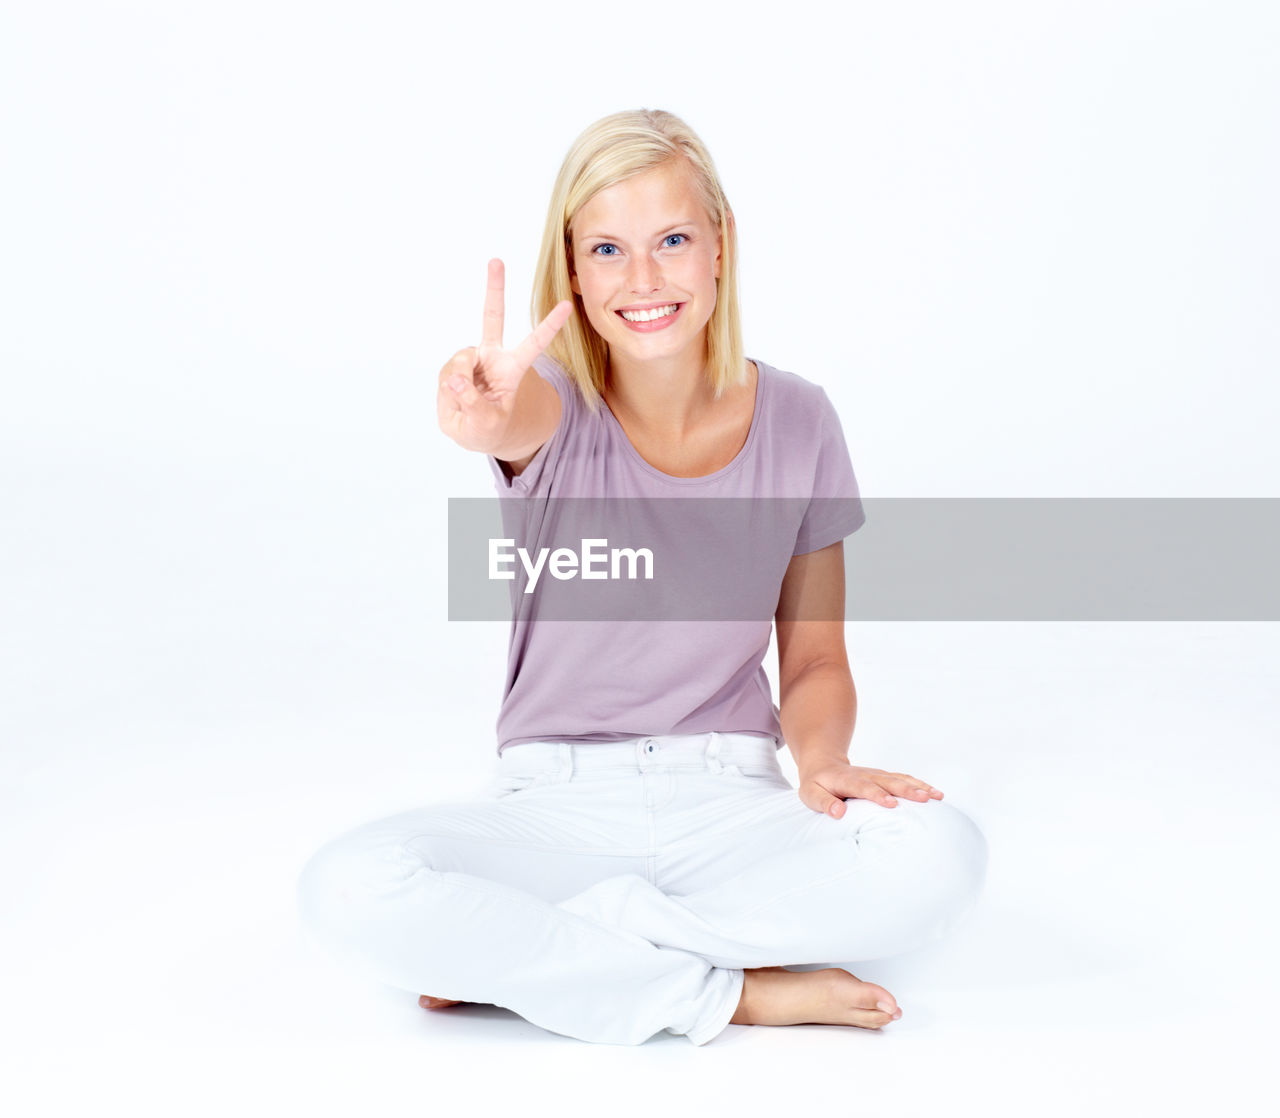 women, sitting, one person, blond hair, smiling, adult, white background, portrait, happiness, looking at camera, studio shot, relaxation, female, cut out, lifestyles, indoors, emotion, full length, physical fitness, wellbeing, young adult, yoga, front view, sports, exercising, cross-legged, positive emotion, cheerful, arm, teeth, person, smile, casual clothing, white, posture, copy space, finger, clothing, vitality, hand, cute